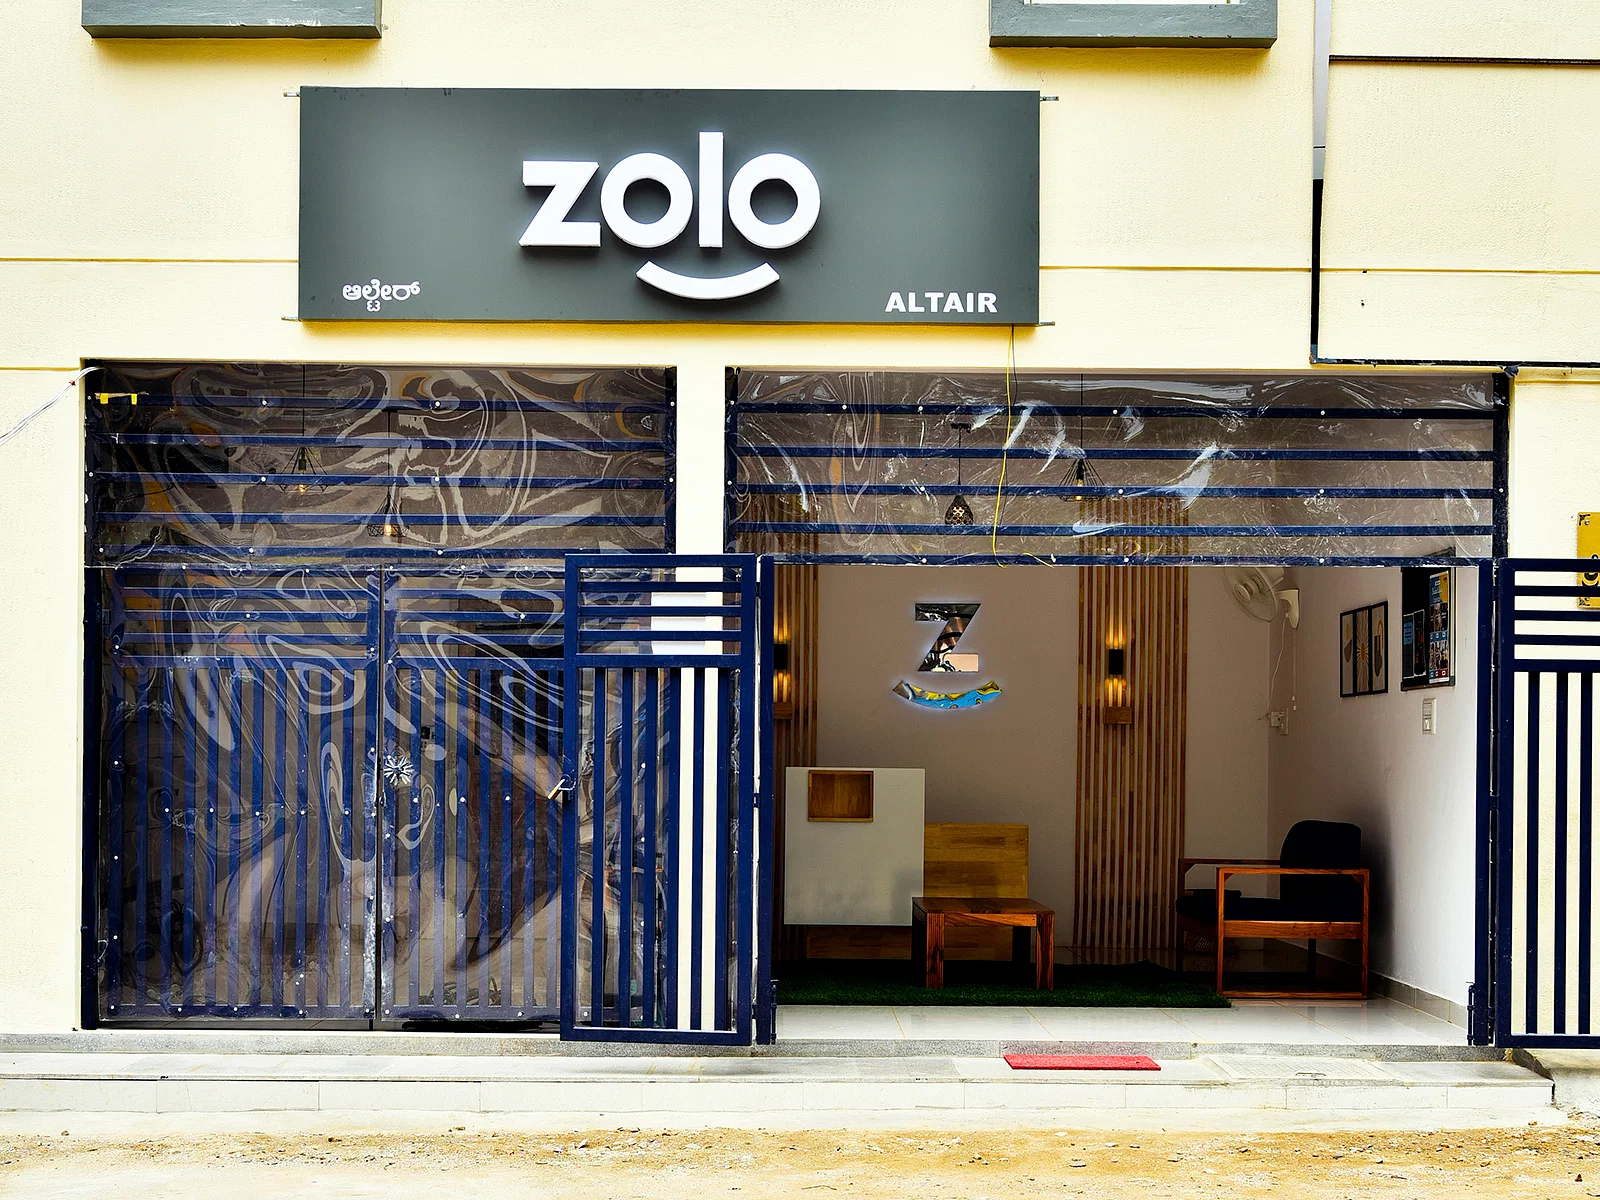 fully furnished Zolo single rooms for rent near me-check out now-Zolo Altair